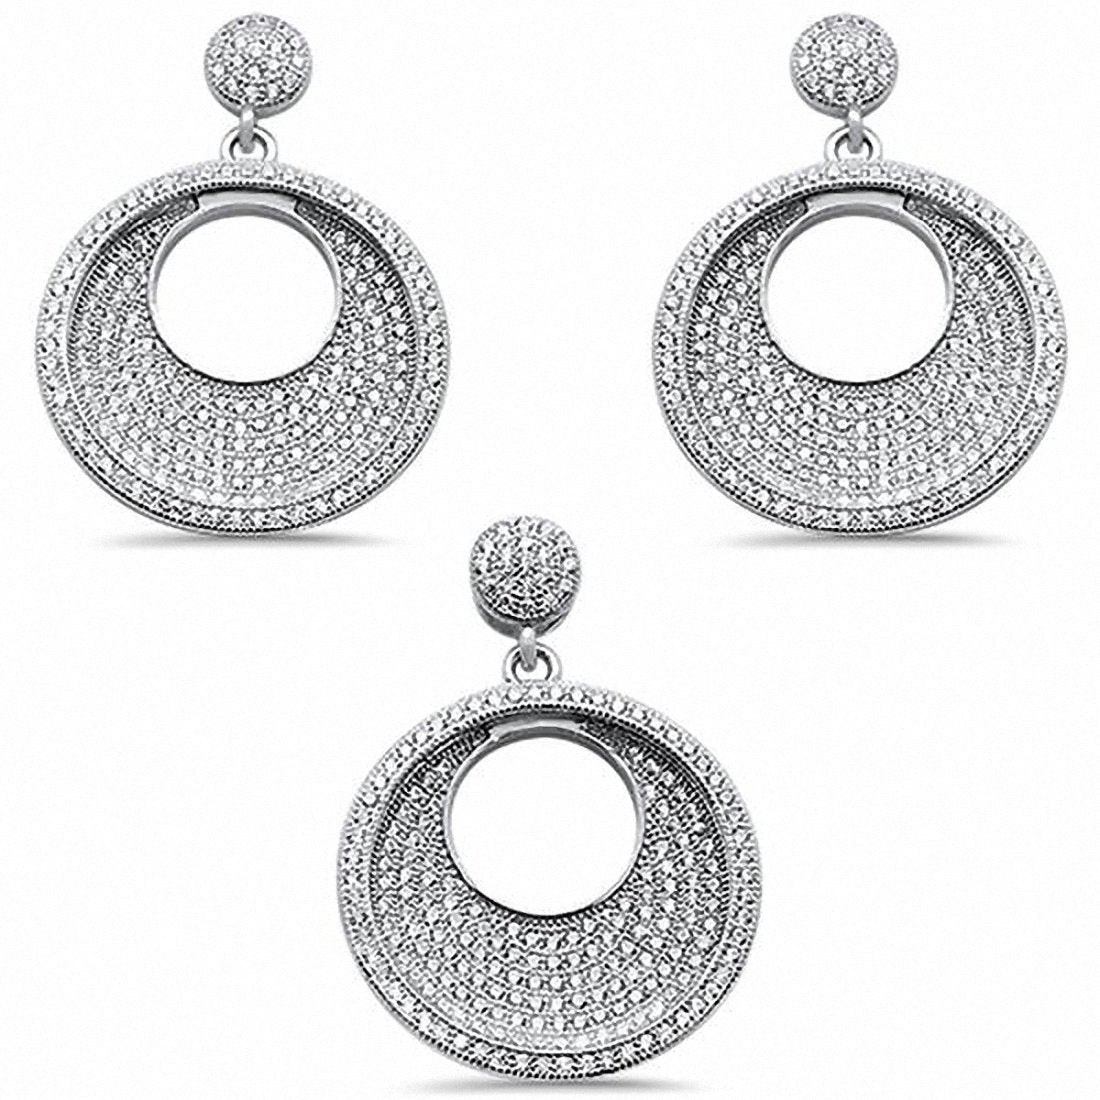 Jewelry Set Pendant Earrings Round Pave Cubic Zirconia 925 Sterling Silver